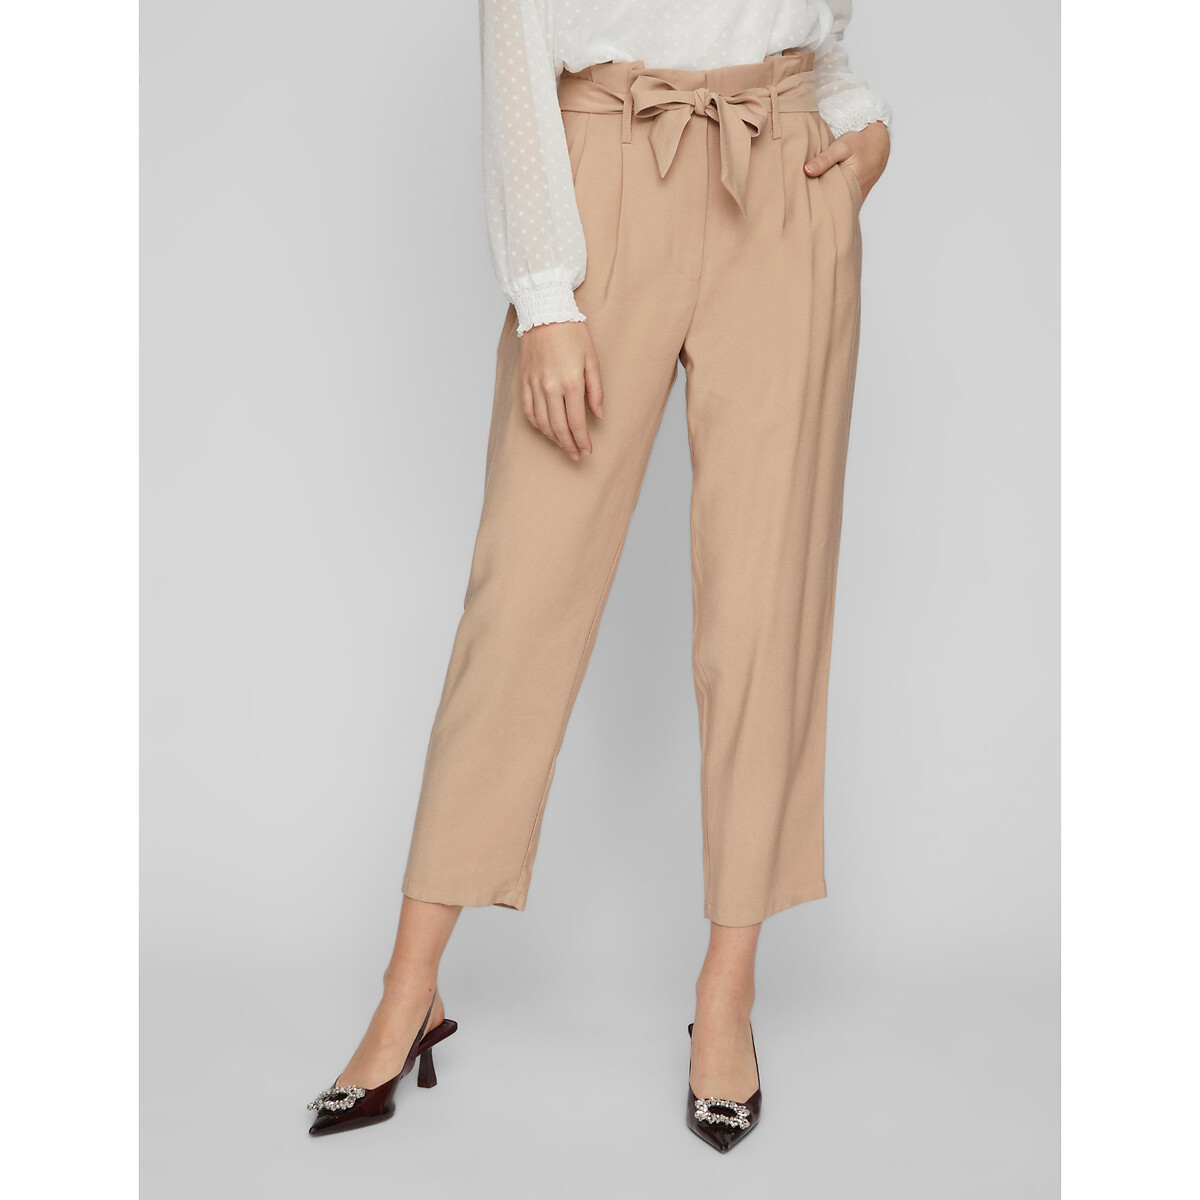 Image of Ankle Grazer Trousers with High Waist